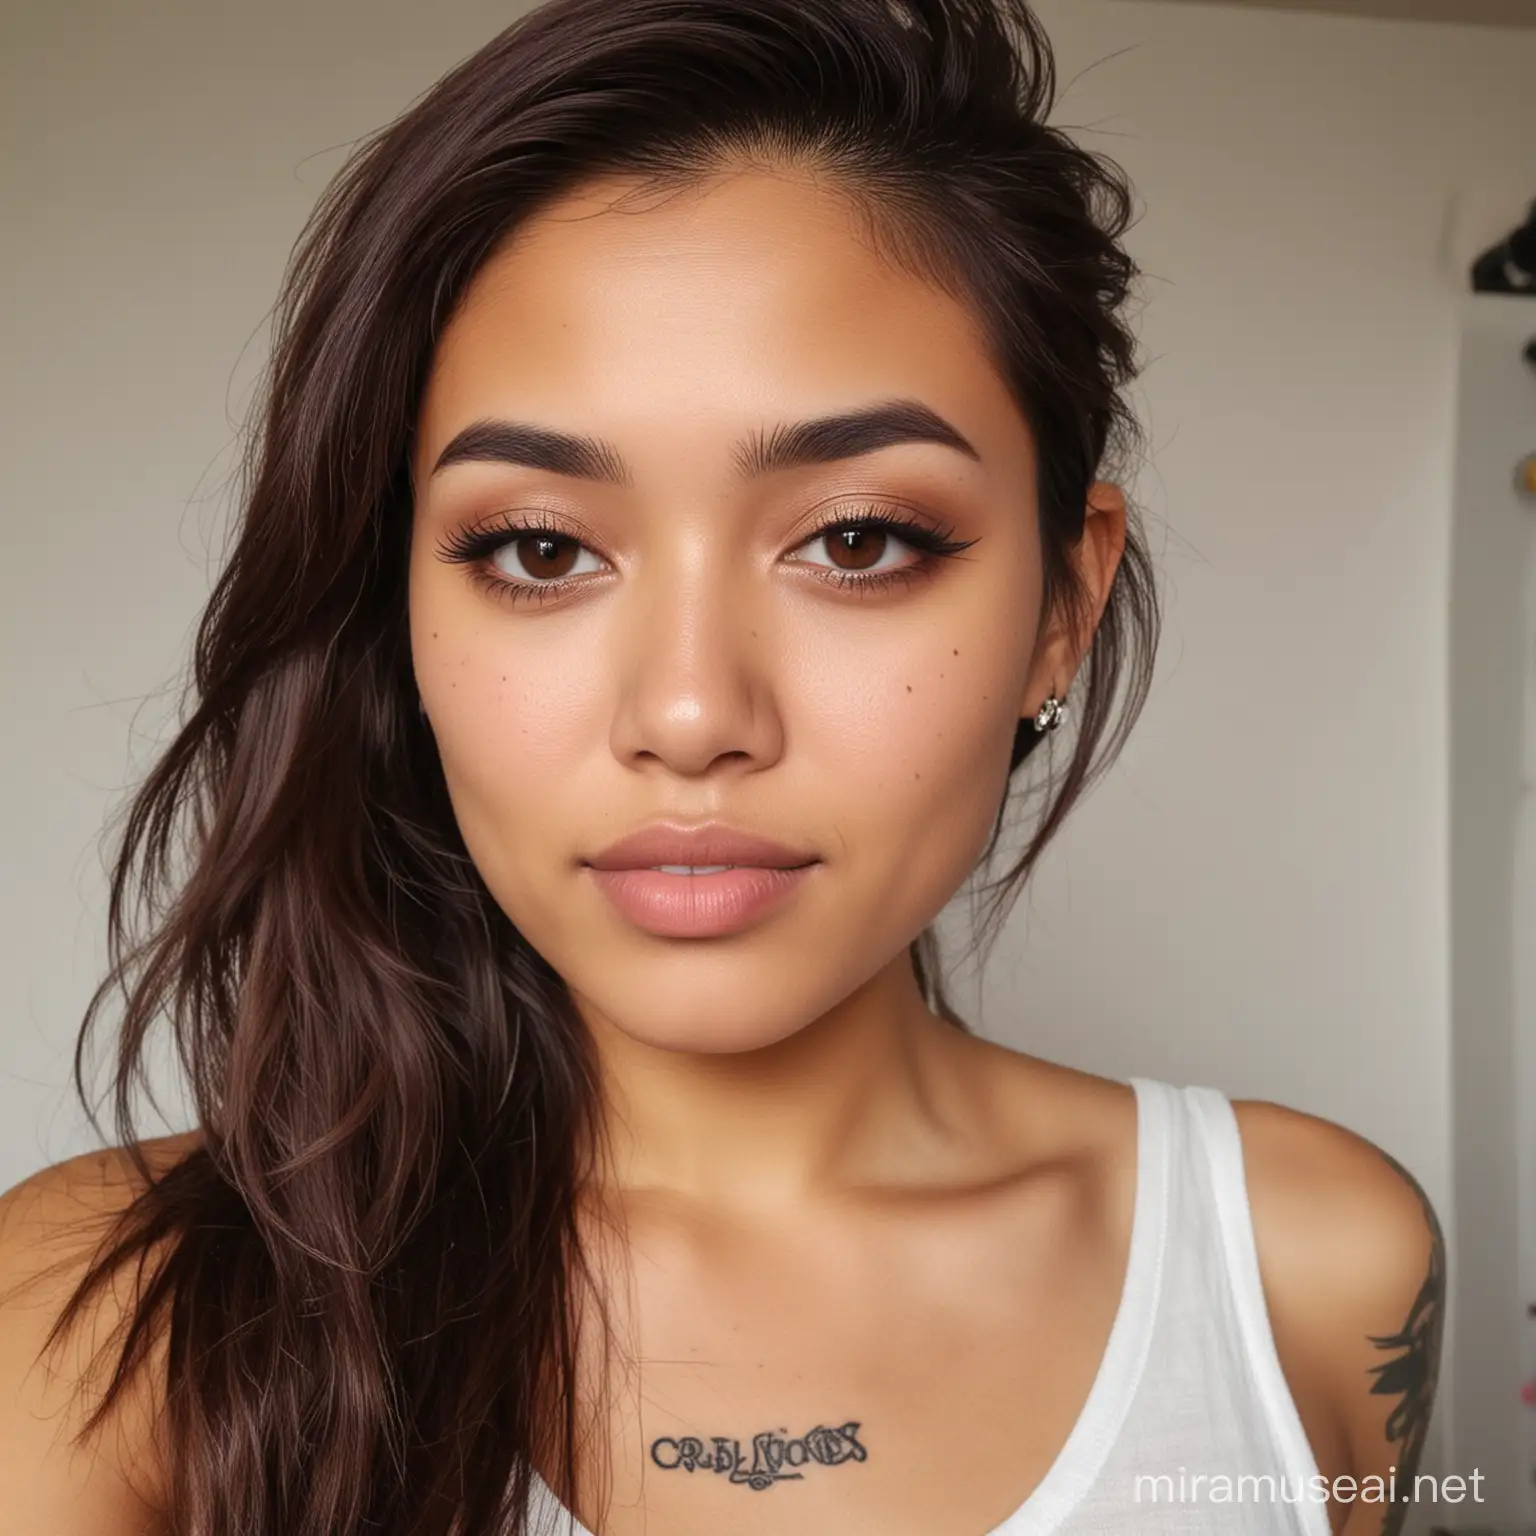 Filipino Bisexual Woman with Tattoos Confident Neurosurgeon Look